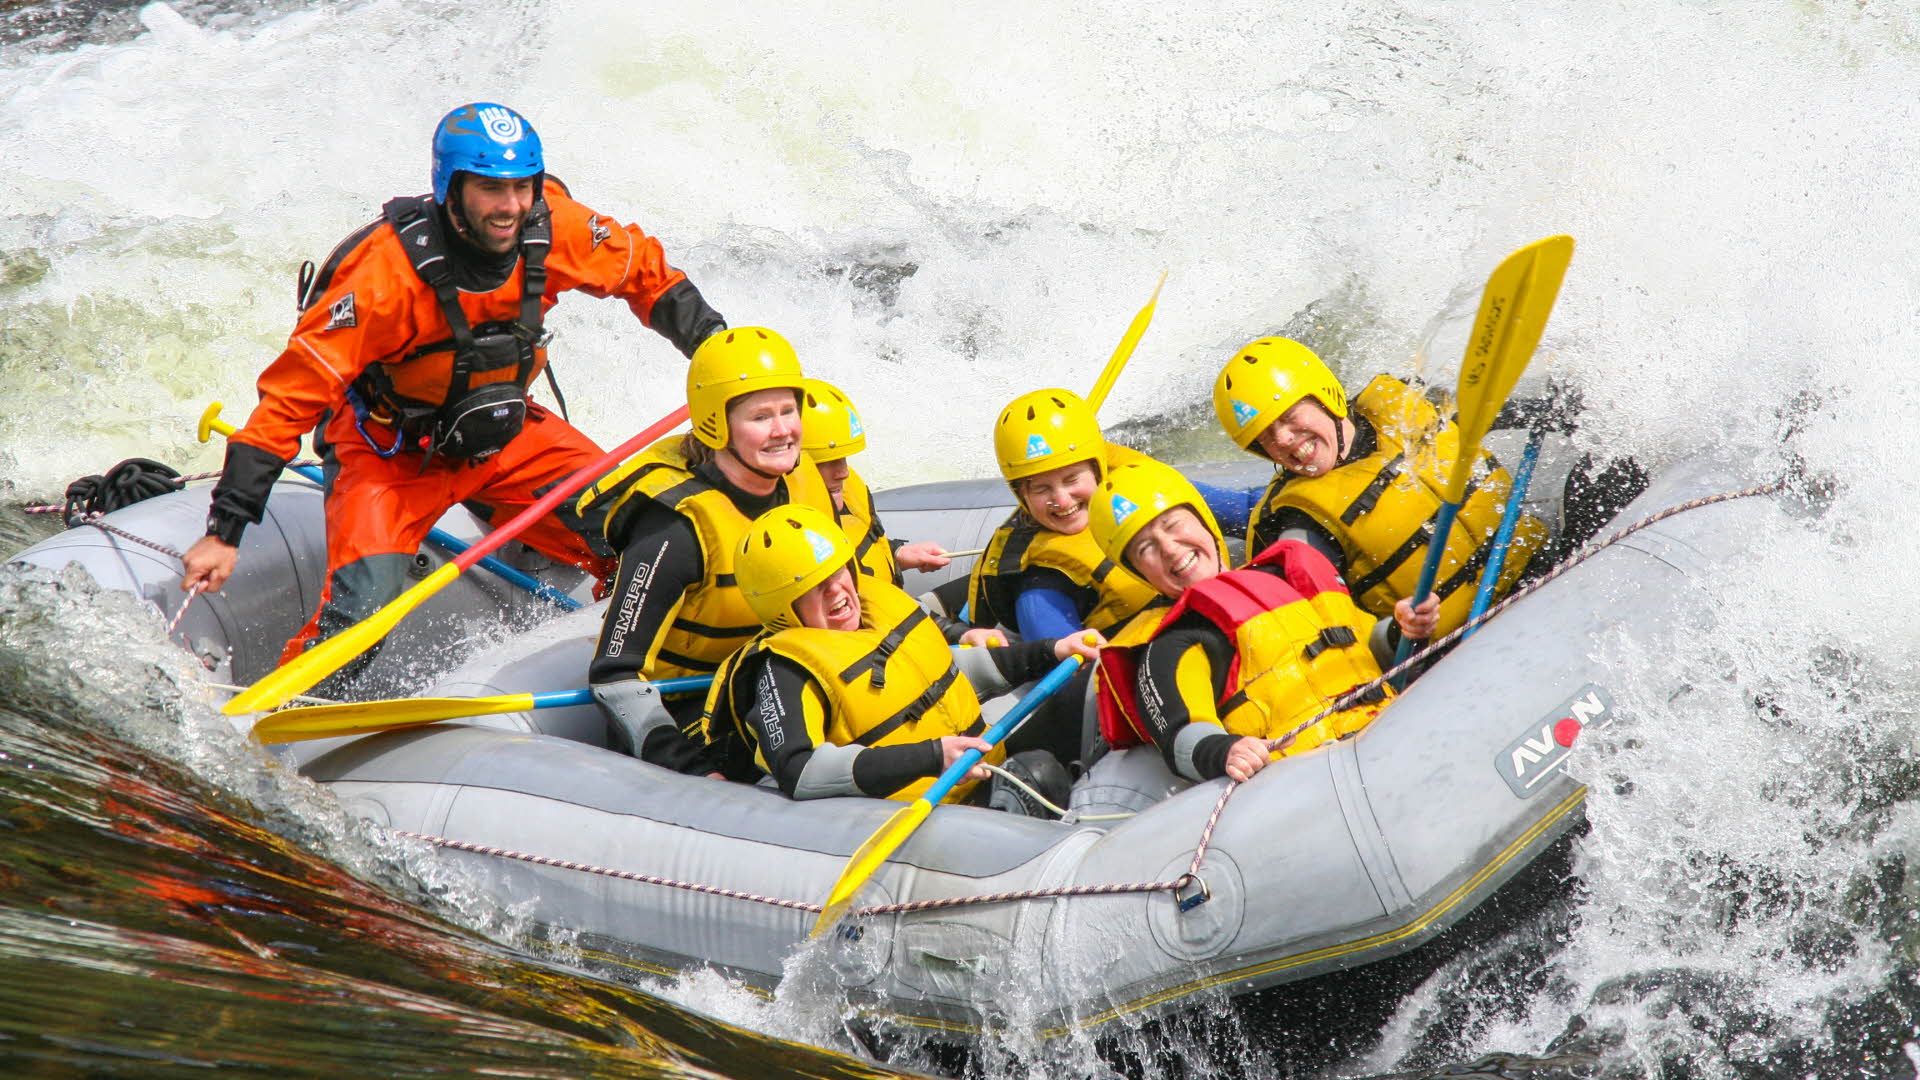 Five women in yellow helmets and life jackets in a raft about to enter a large wave. A guide in an orange dry suit standing behind.